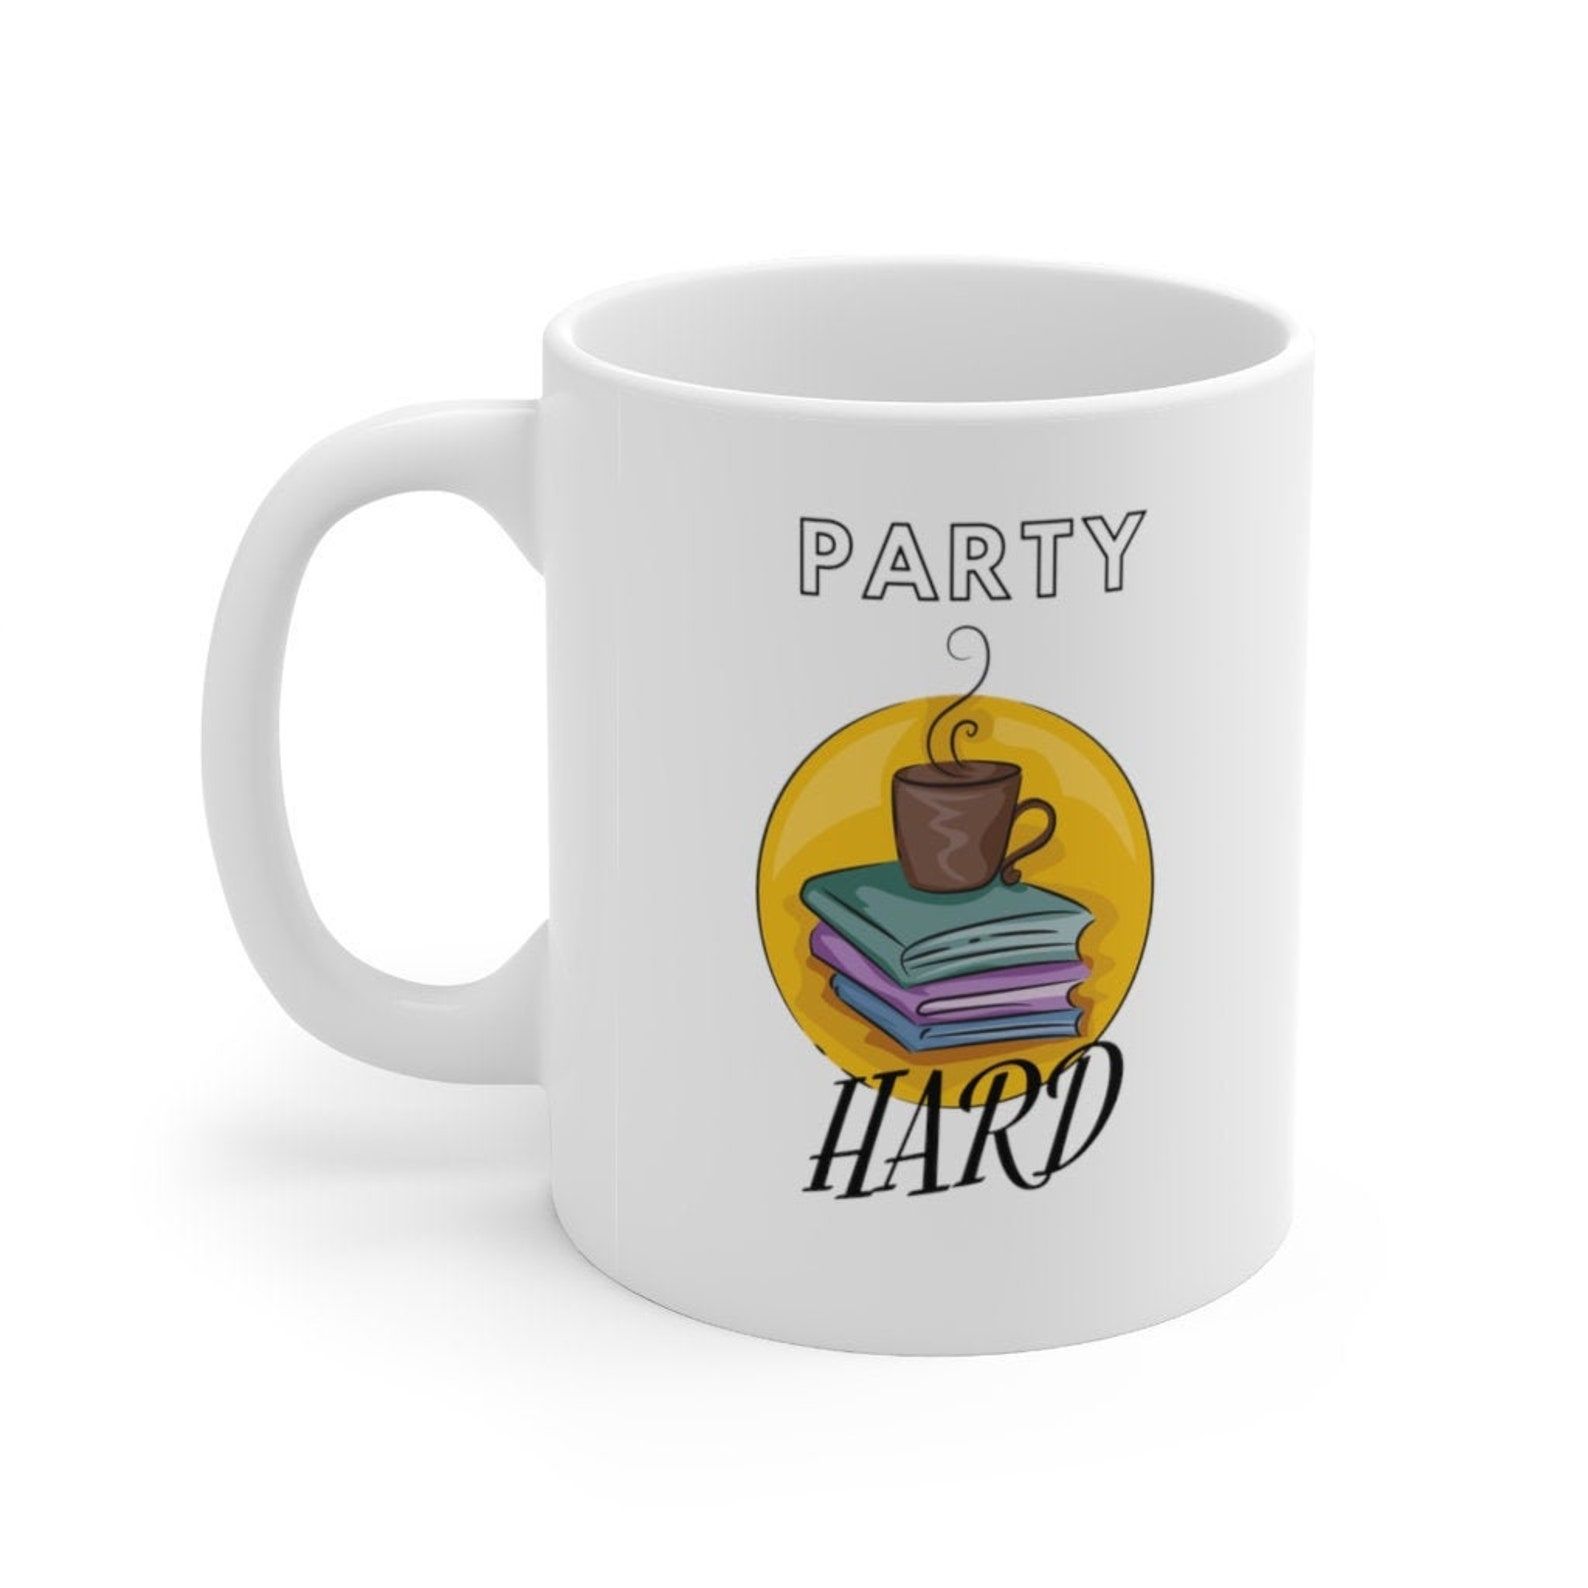 Image of a white mug with a yellow circle on it. The circle has three books and a mug. The text outside the image reads "party hard."